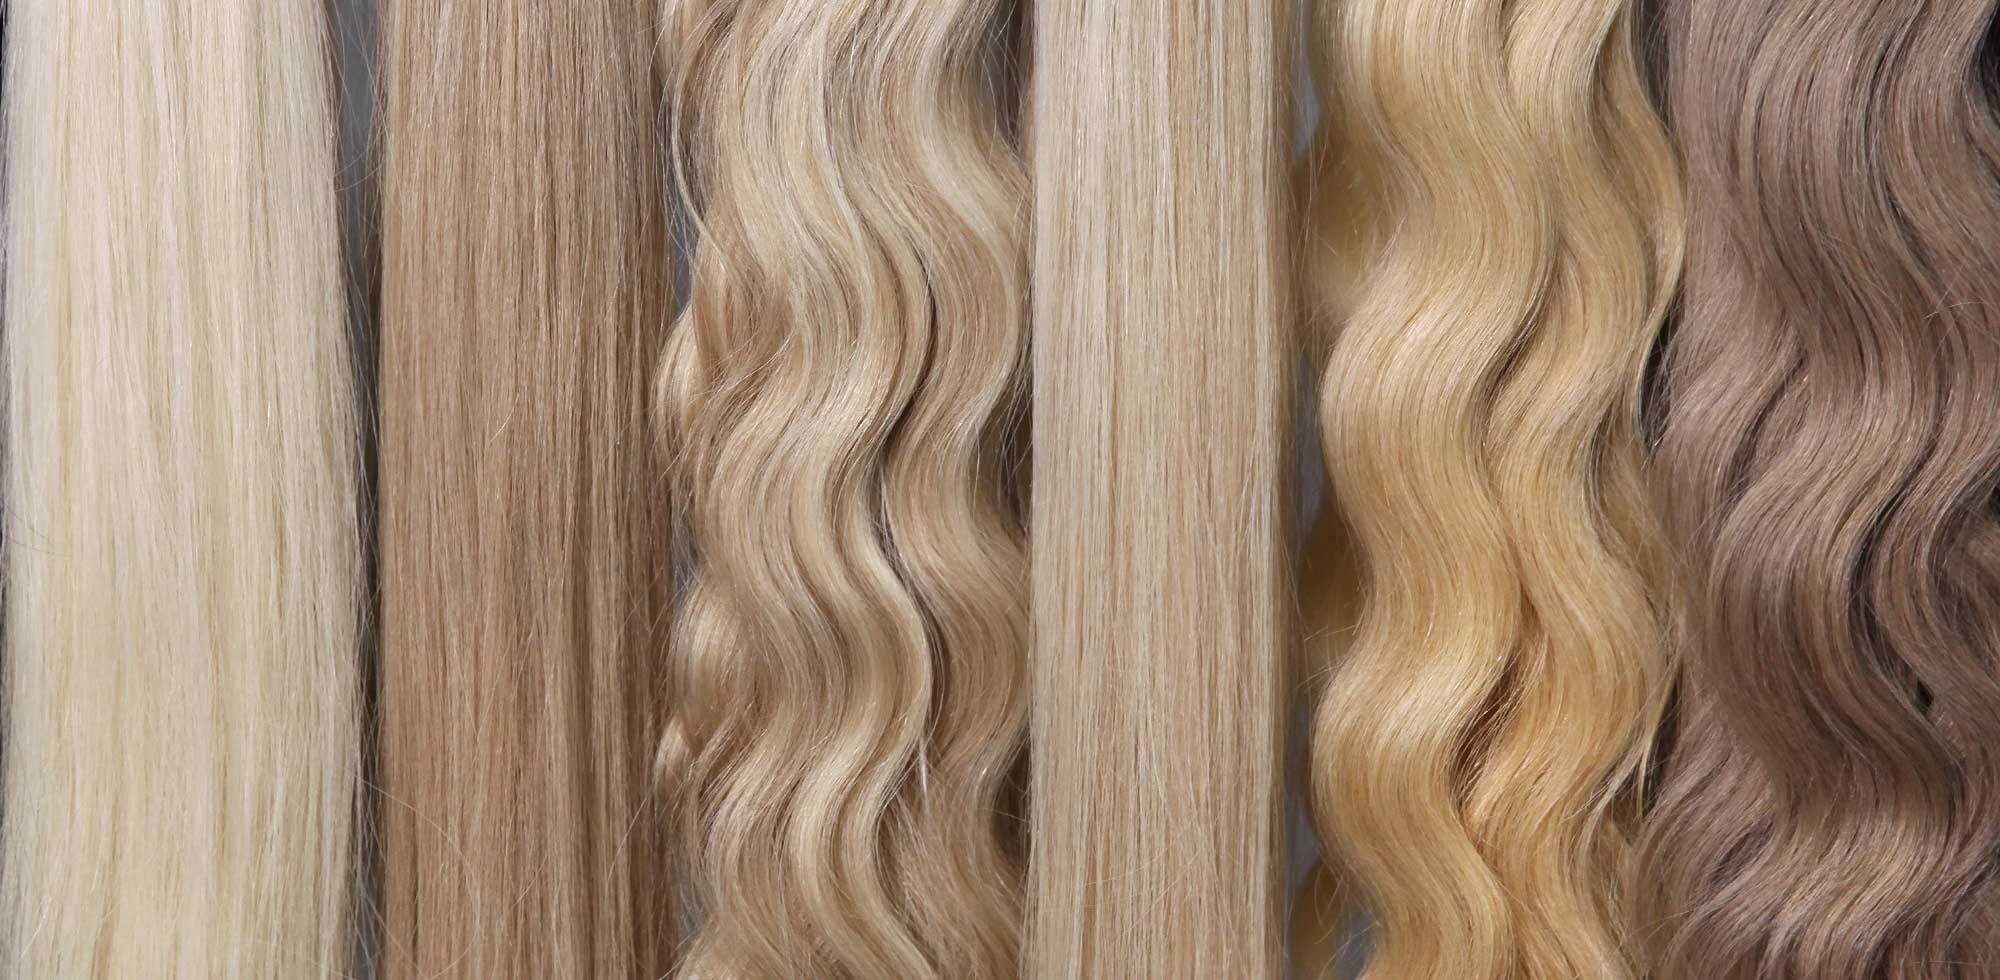 light colored hair extensions